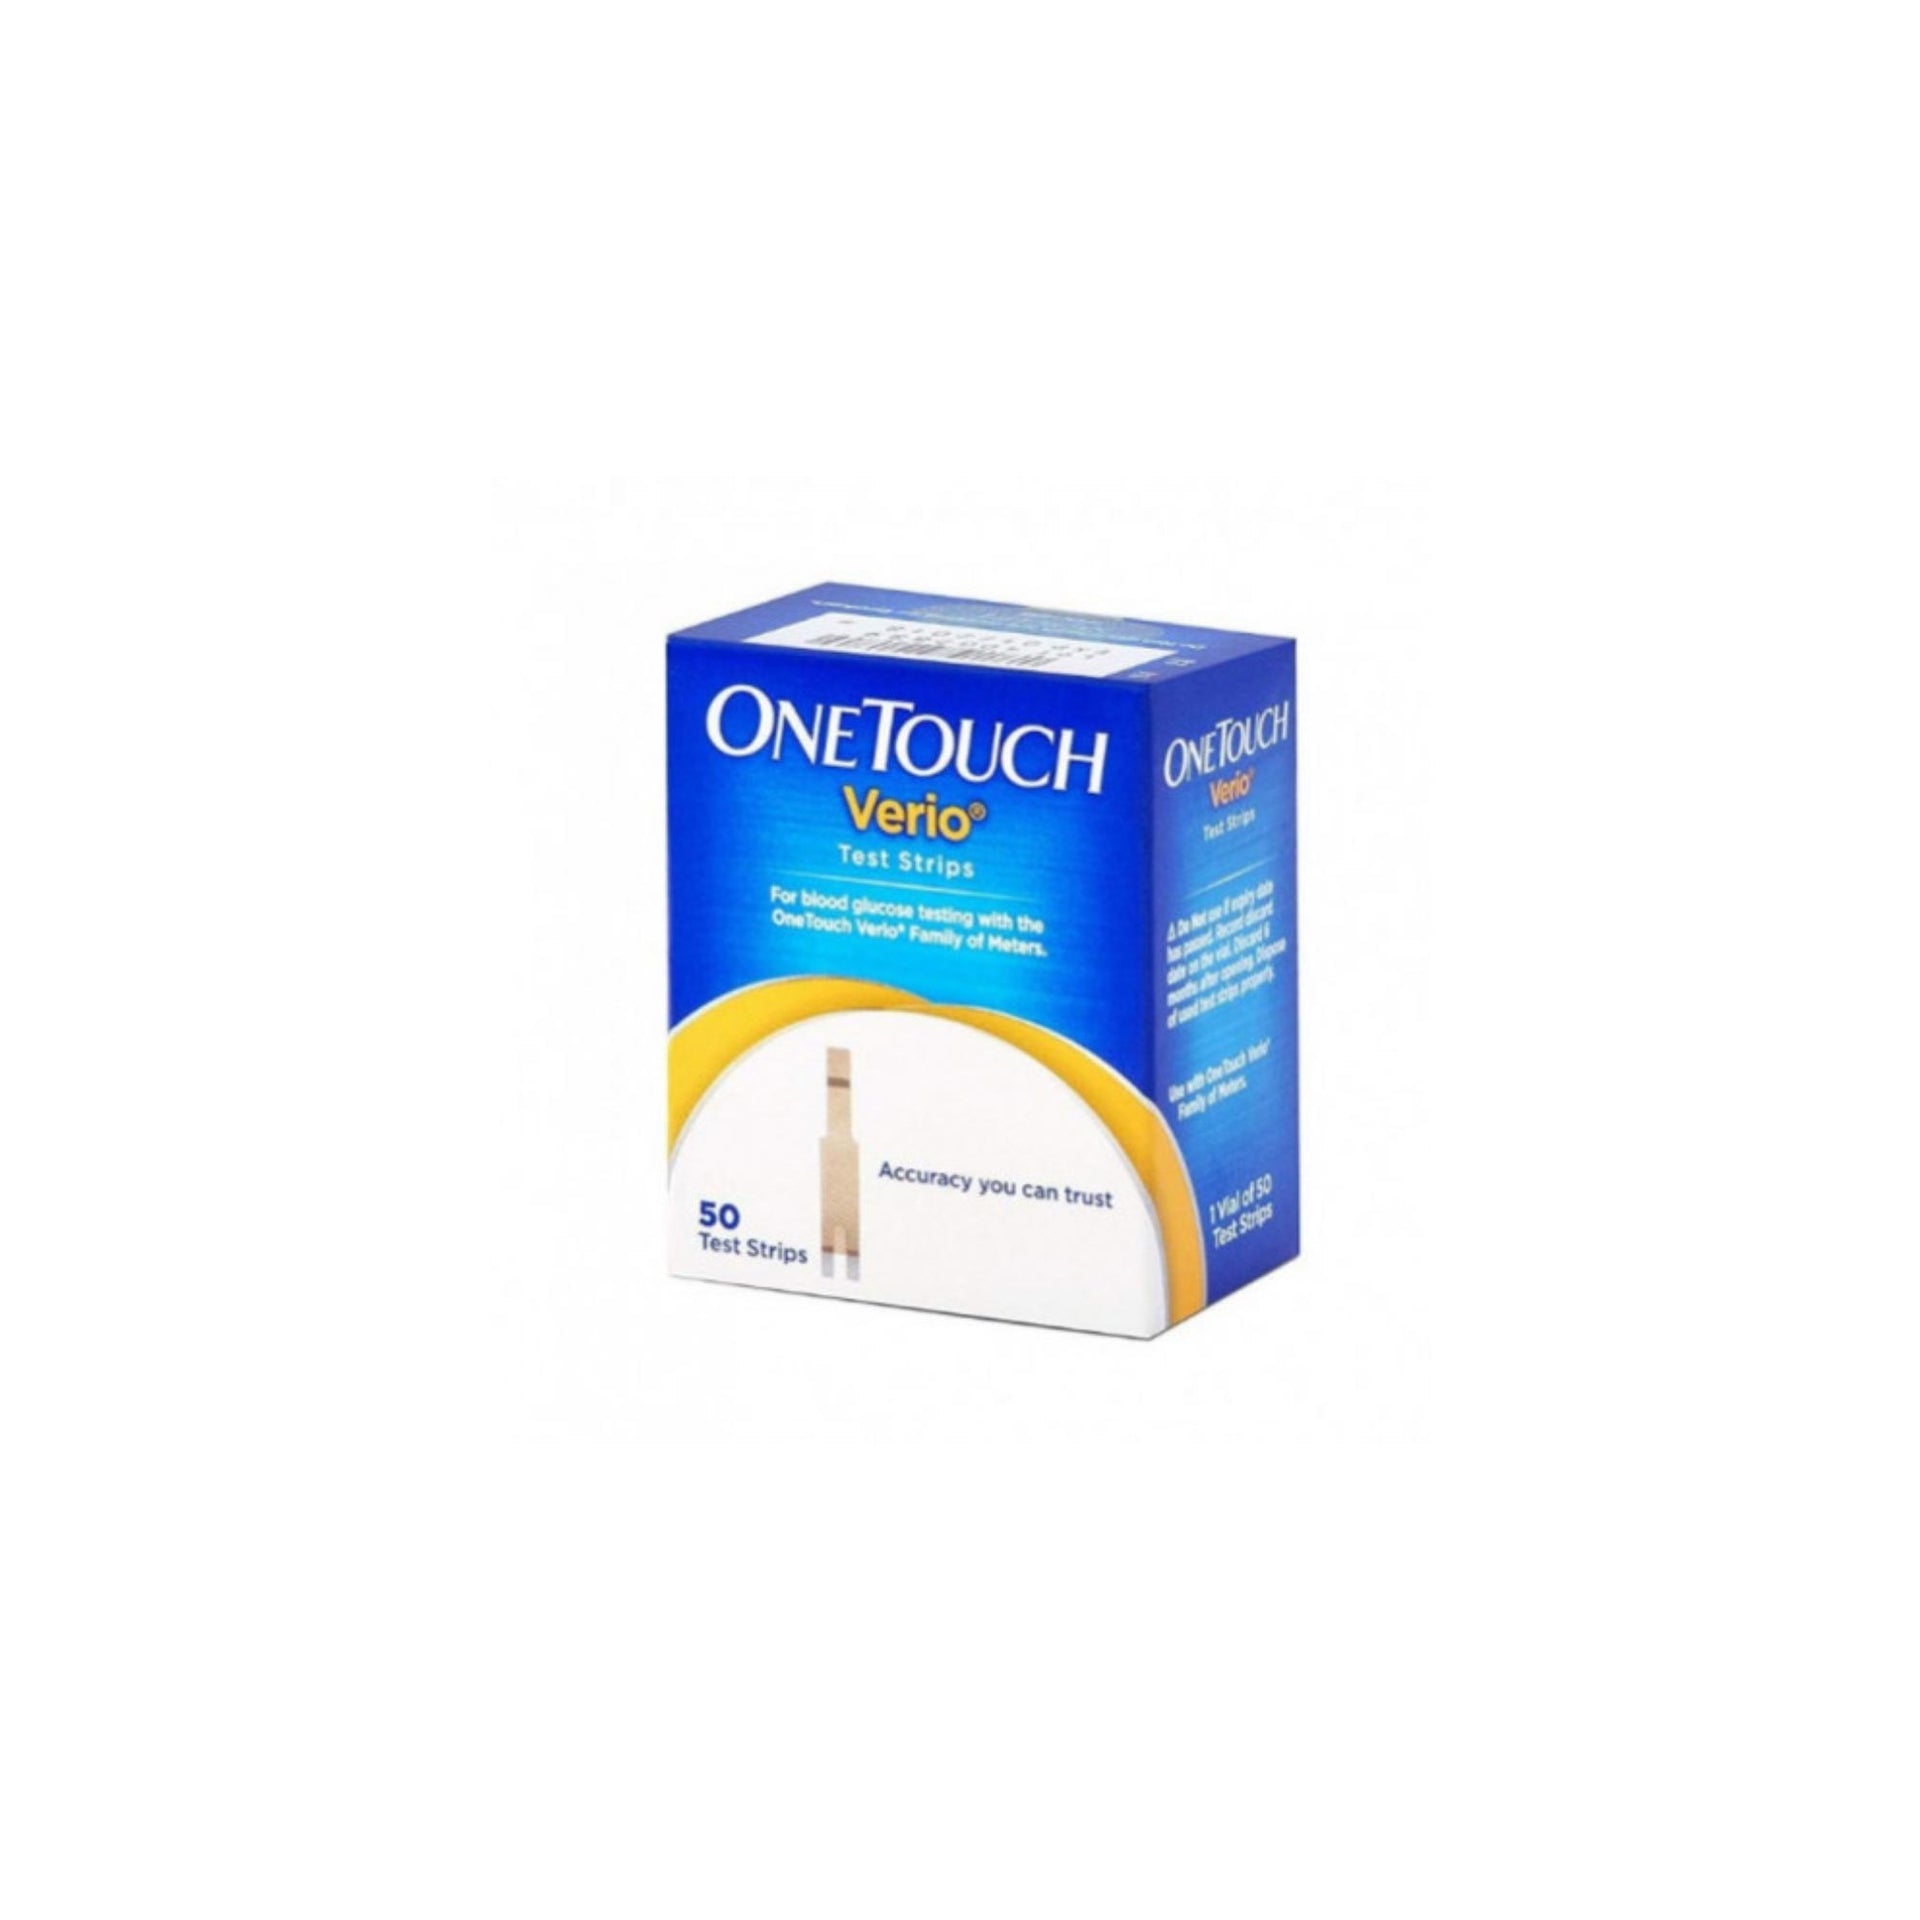 Buy One Touch Verio Test Strips From Canada Online - CDI